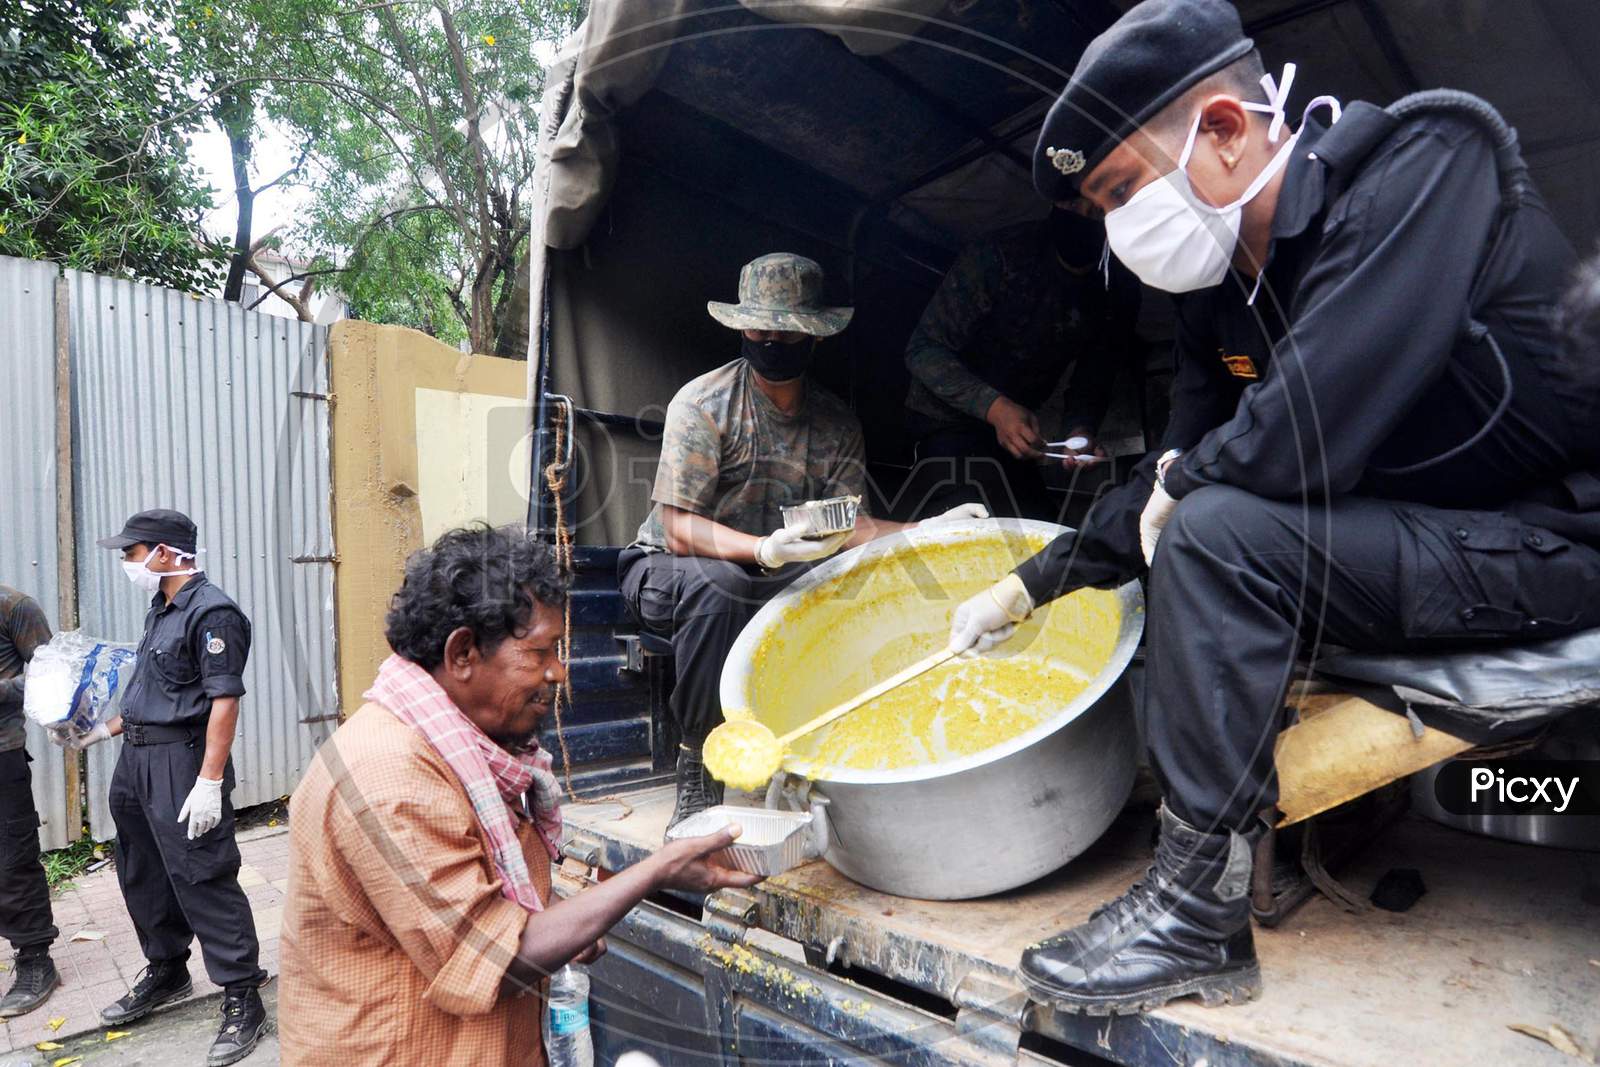 Assam Police Personnel Distribute Food Among The Needy  During The Nationwide Lock down In The Wake Of Corona virus Pandemic, In Guwahati On April 18,2020